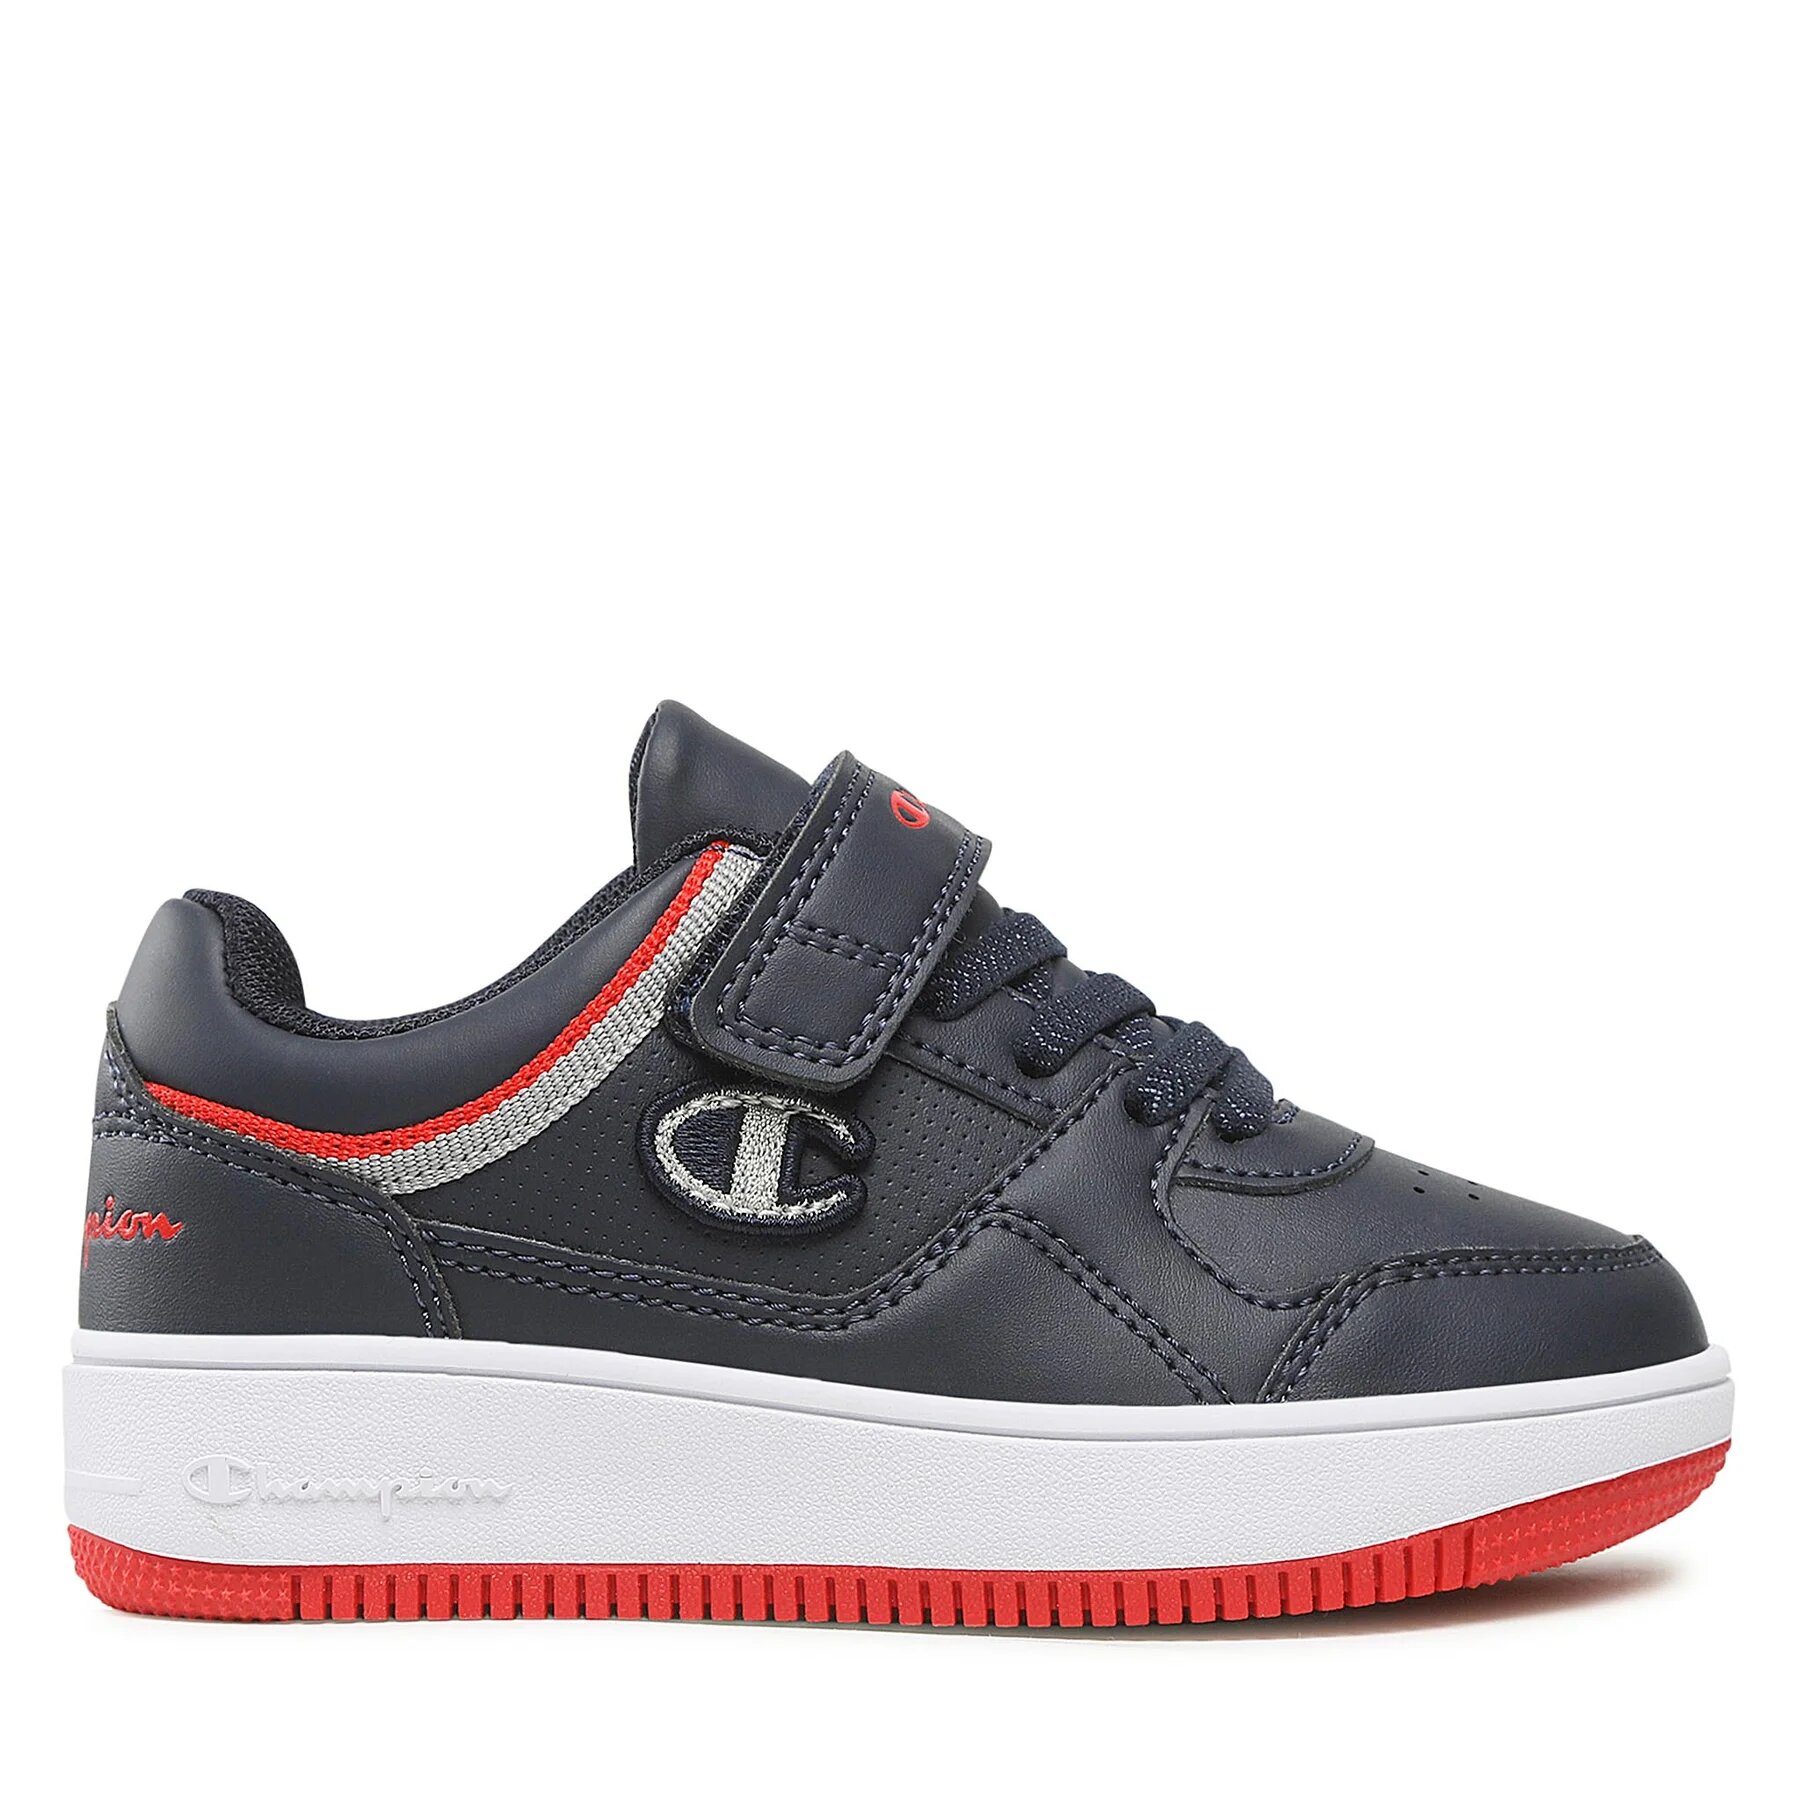 CHAMPION Sneakers Rebound Low B Ps 